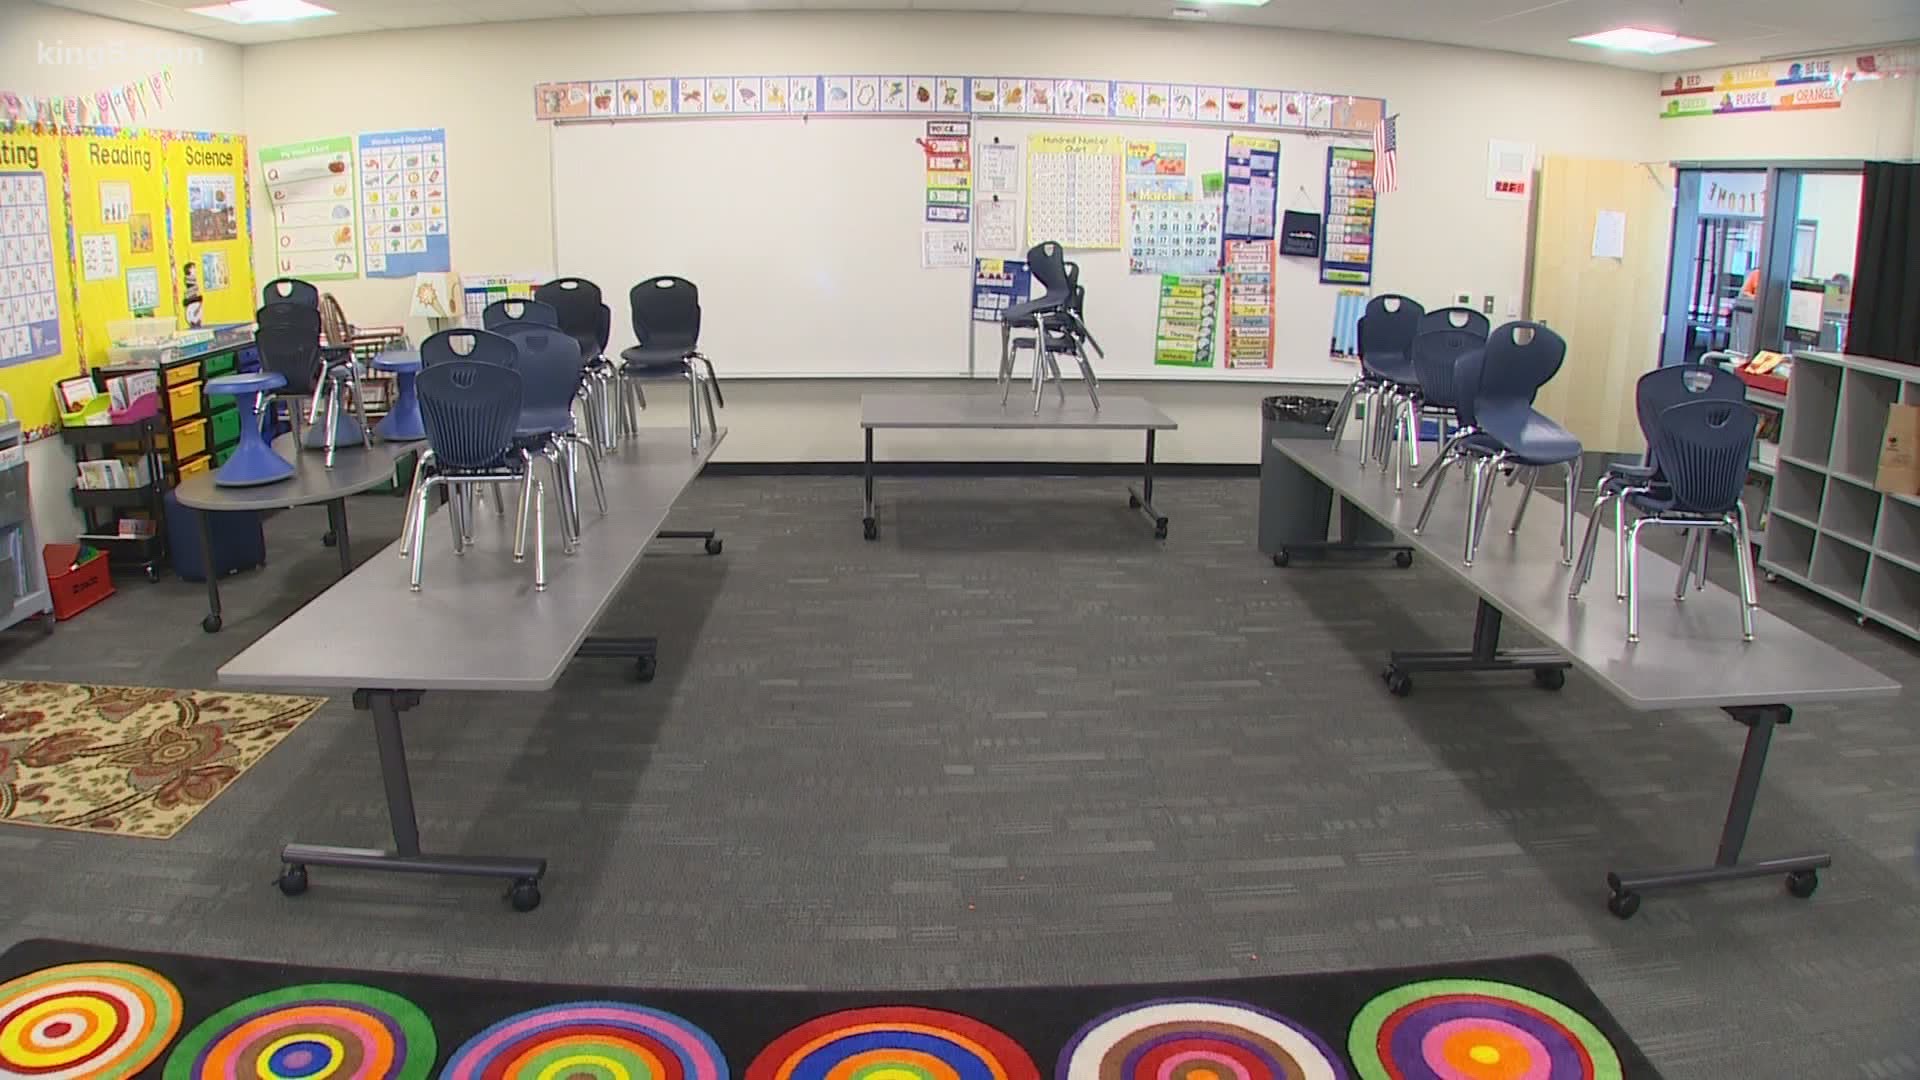 The Seattle Public Schools Board of Directors will vote on the recommendation during a meeting on August 12.